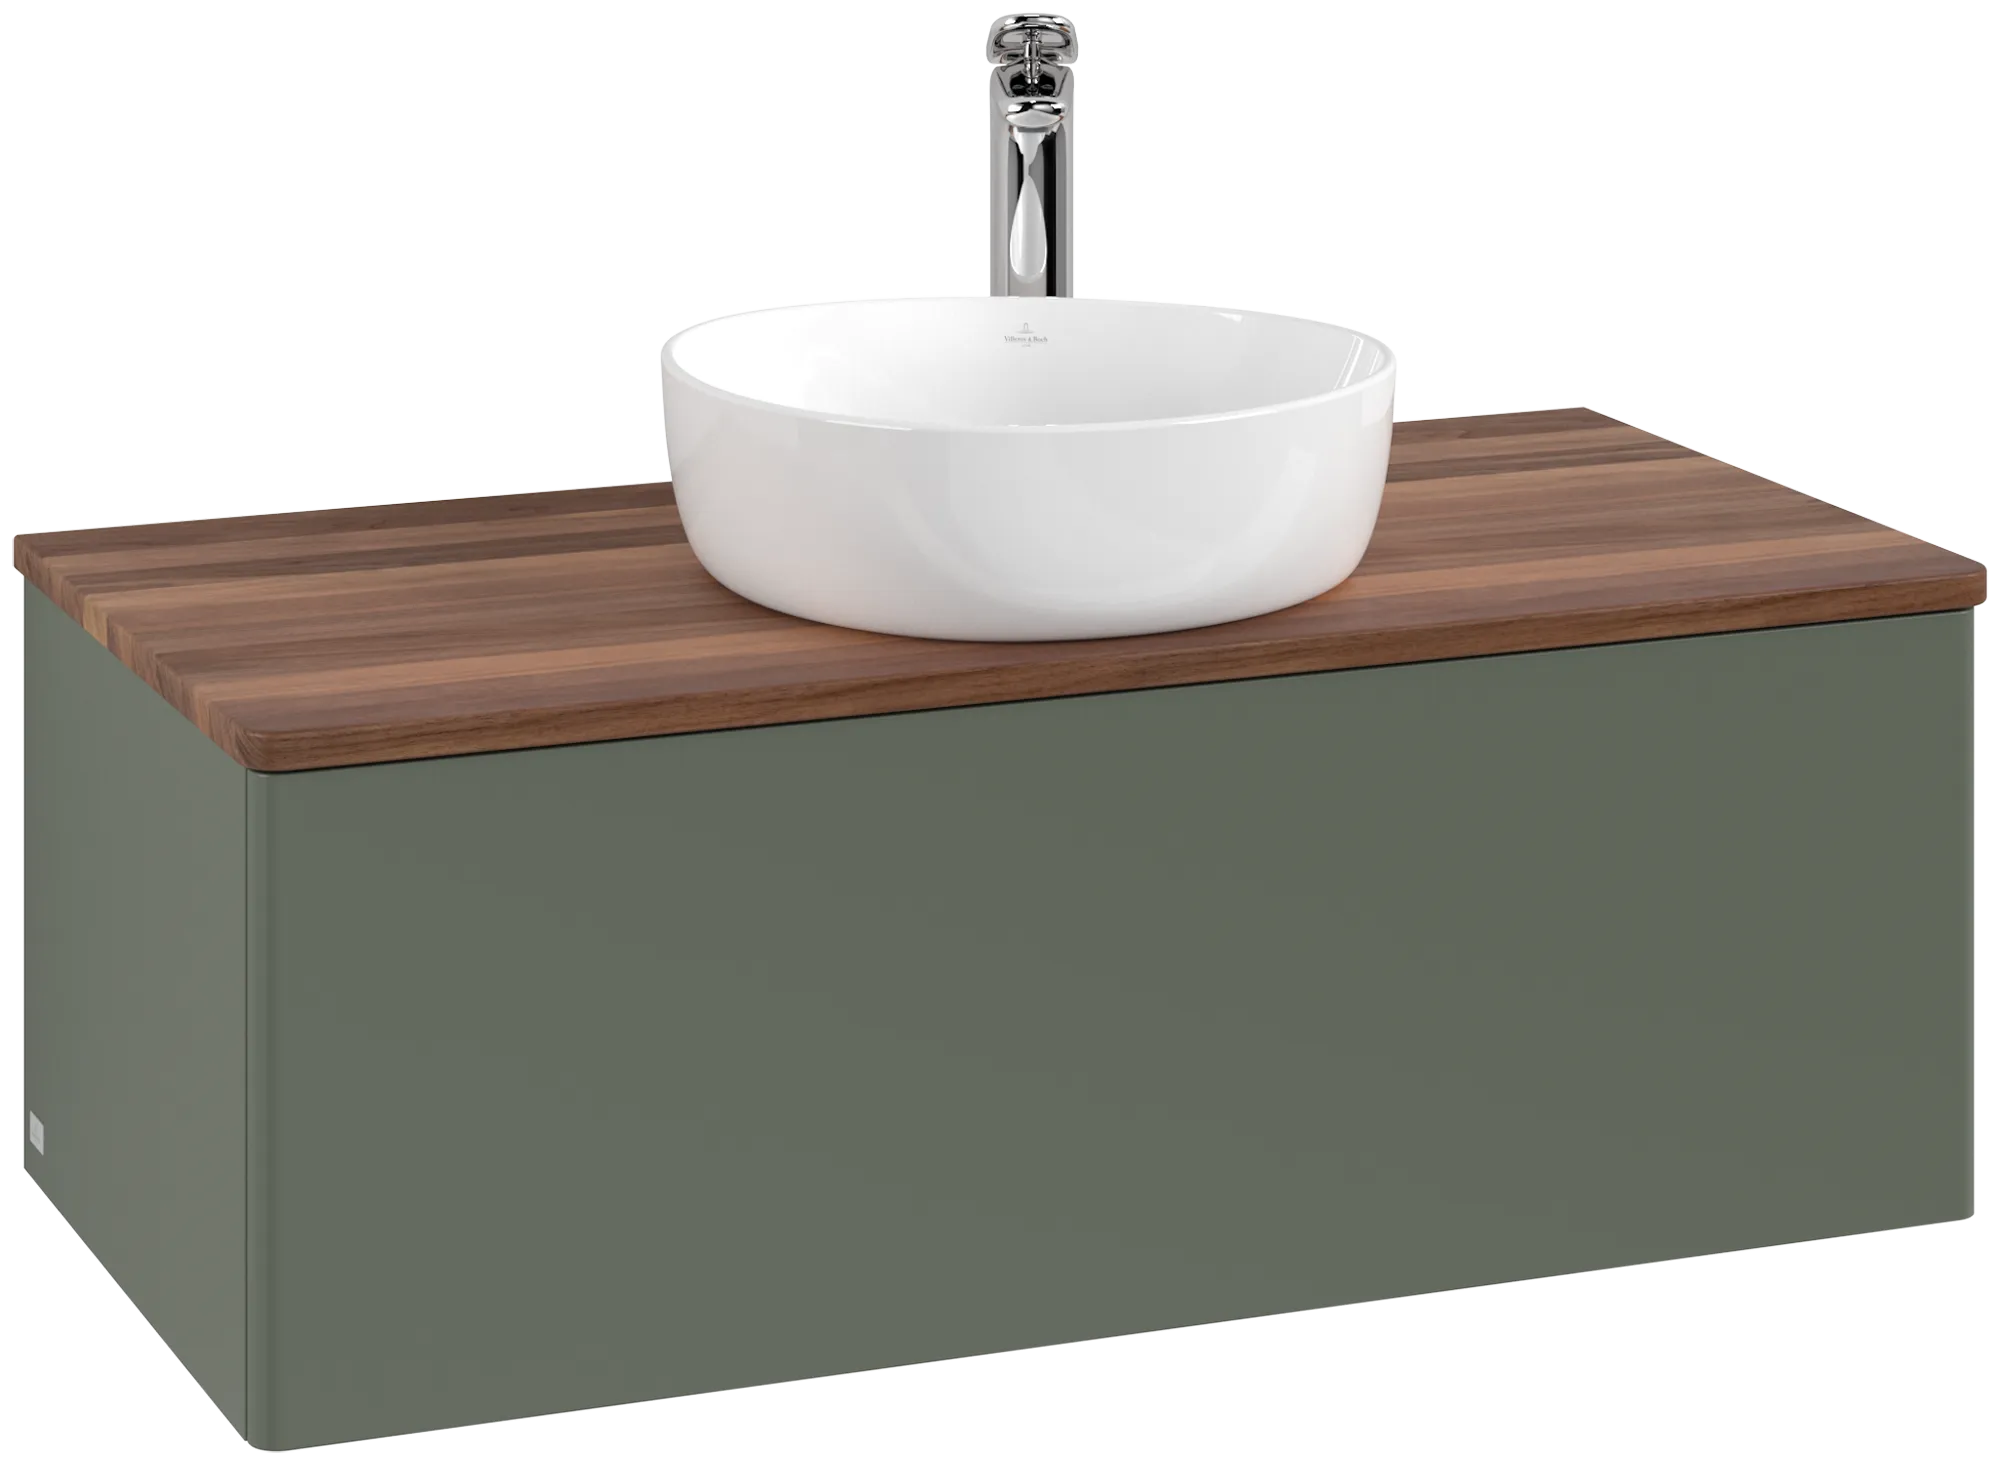 Obrázek VILLEROY BOCH Antao Vanity unit, 1 pull-out compartment, 1000 x 360 x 500 mm, Front without structure, Leaf Green Matt Lacquer / Warm Walnut #K31052HL